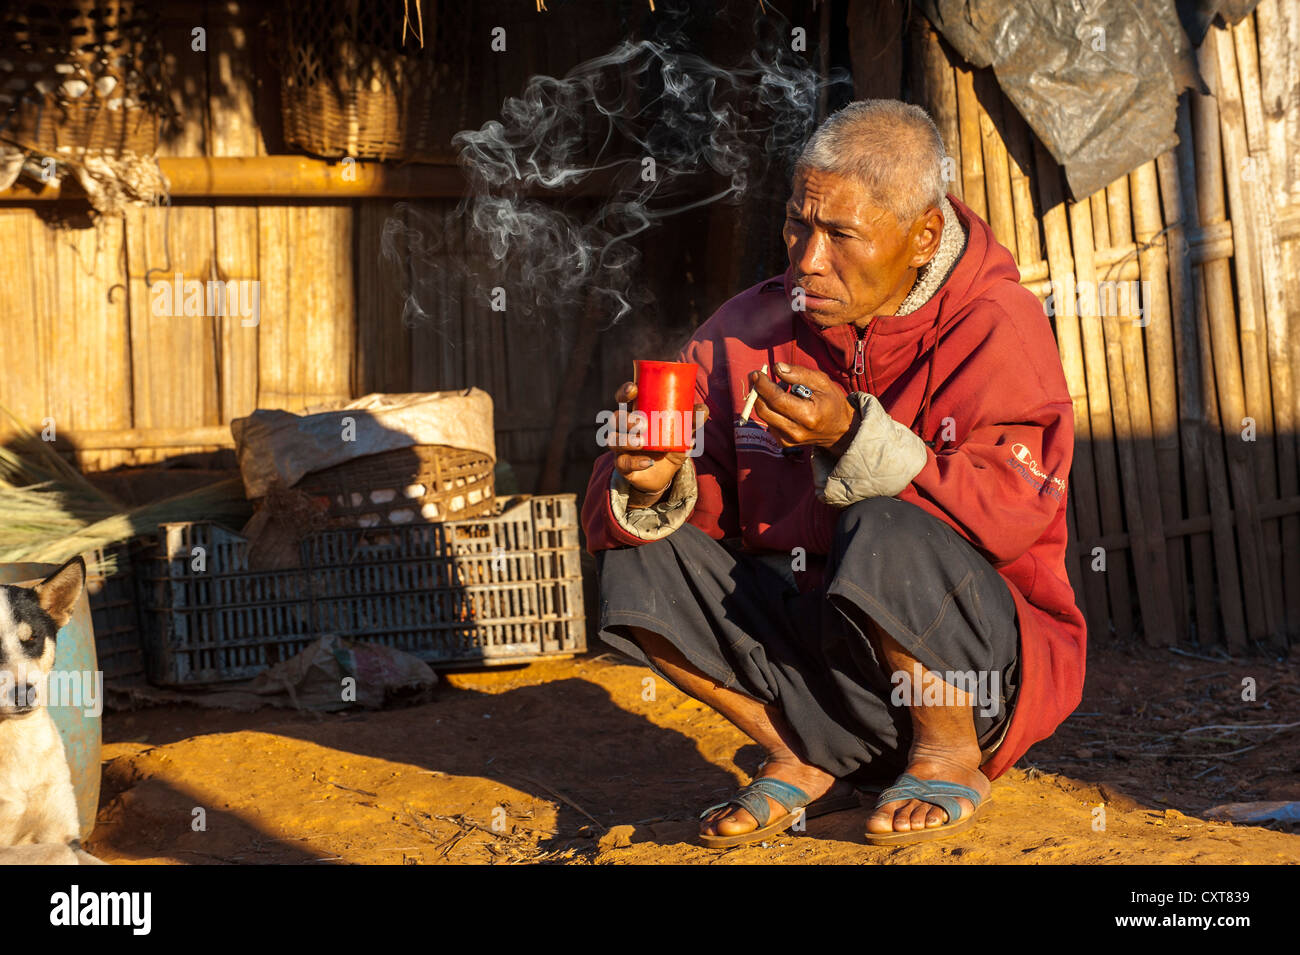 Man smoking a cigarette and drinking tea in front of a straw hut, village of the Akha hill tribe, ethnic minority Stock Photo